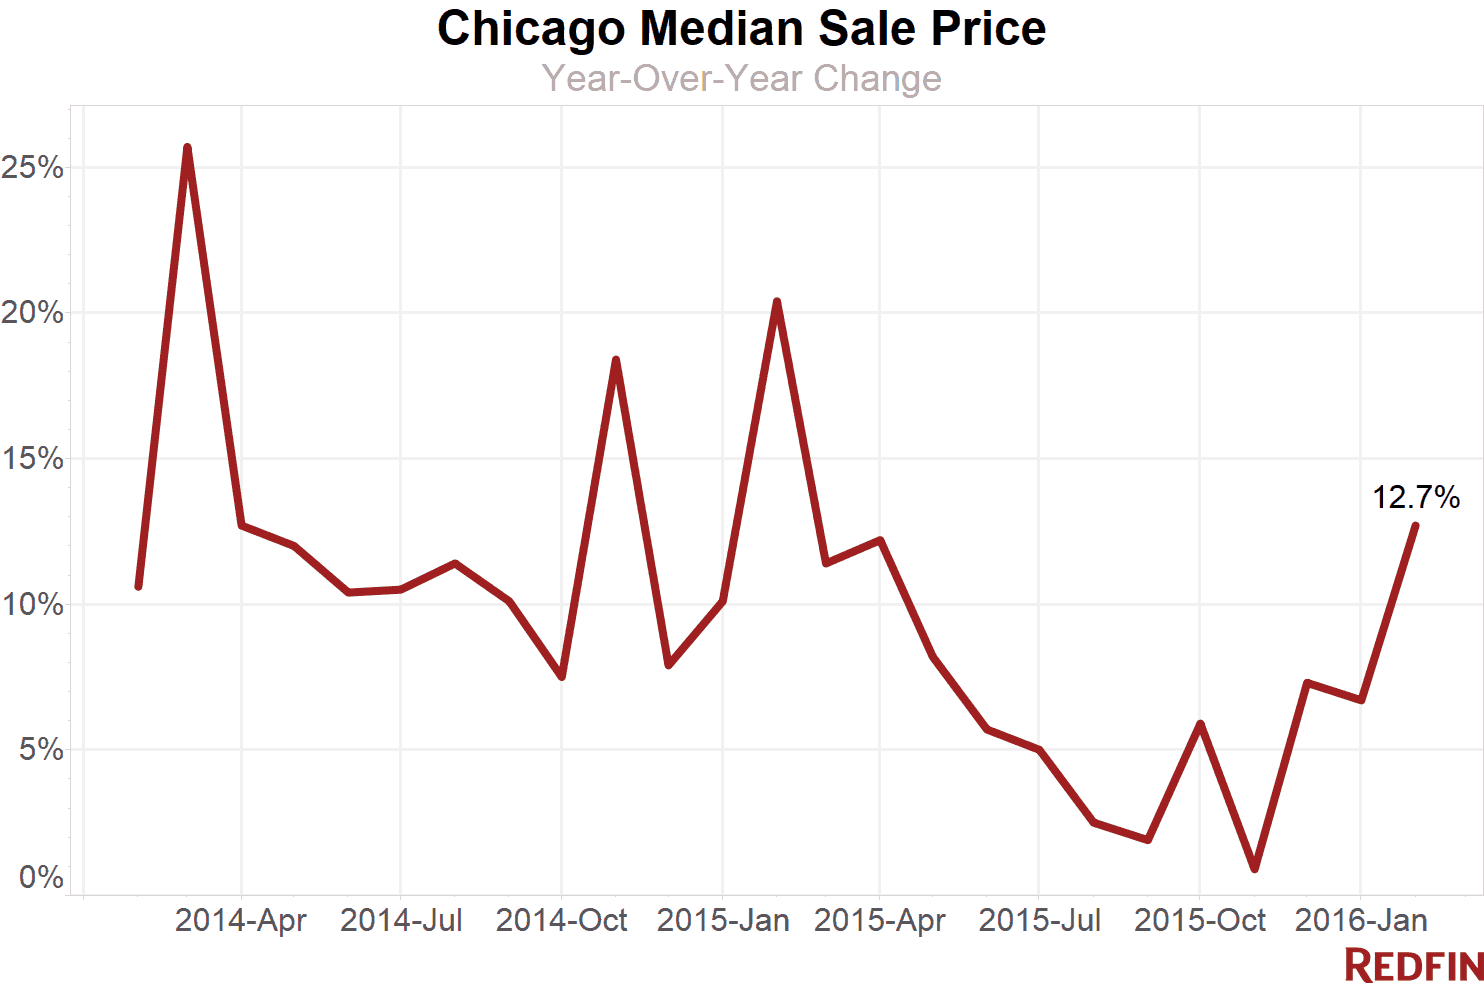 Chicago home prices